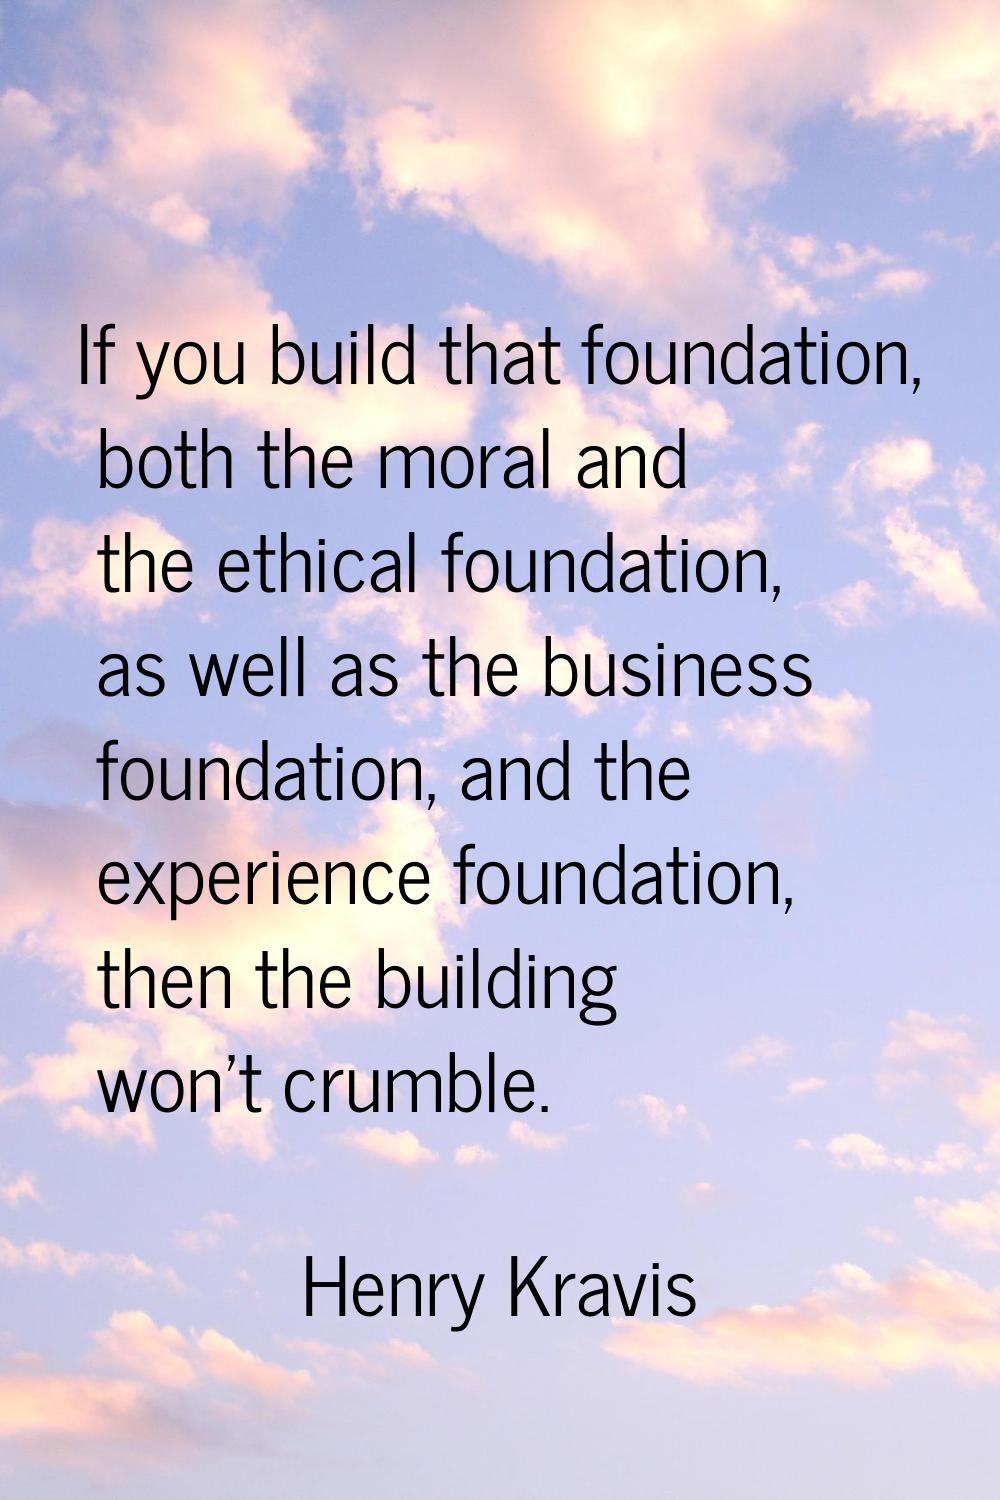 If you build that foundation, both the moral and the ethical foundation, as well as the business fo